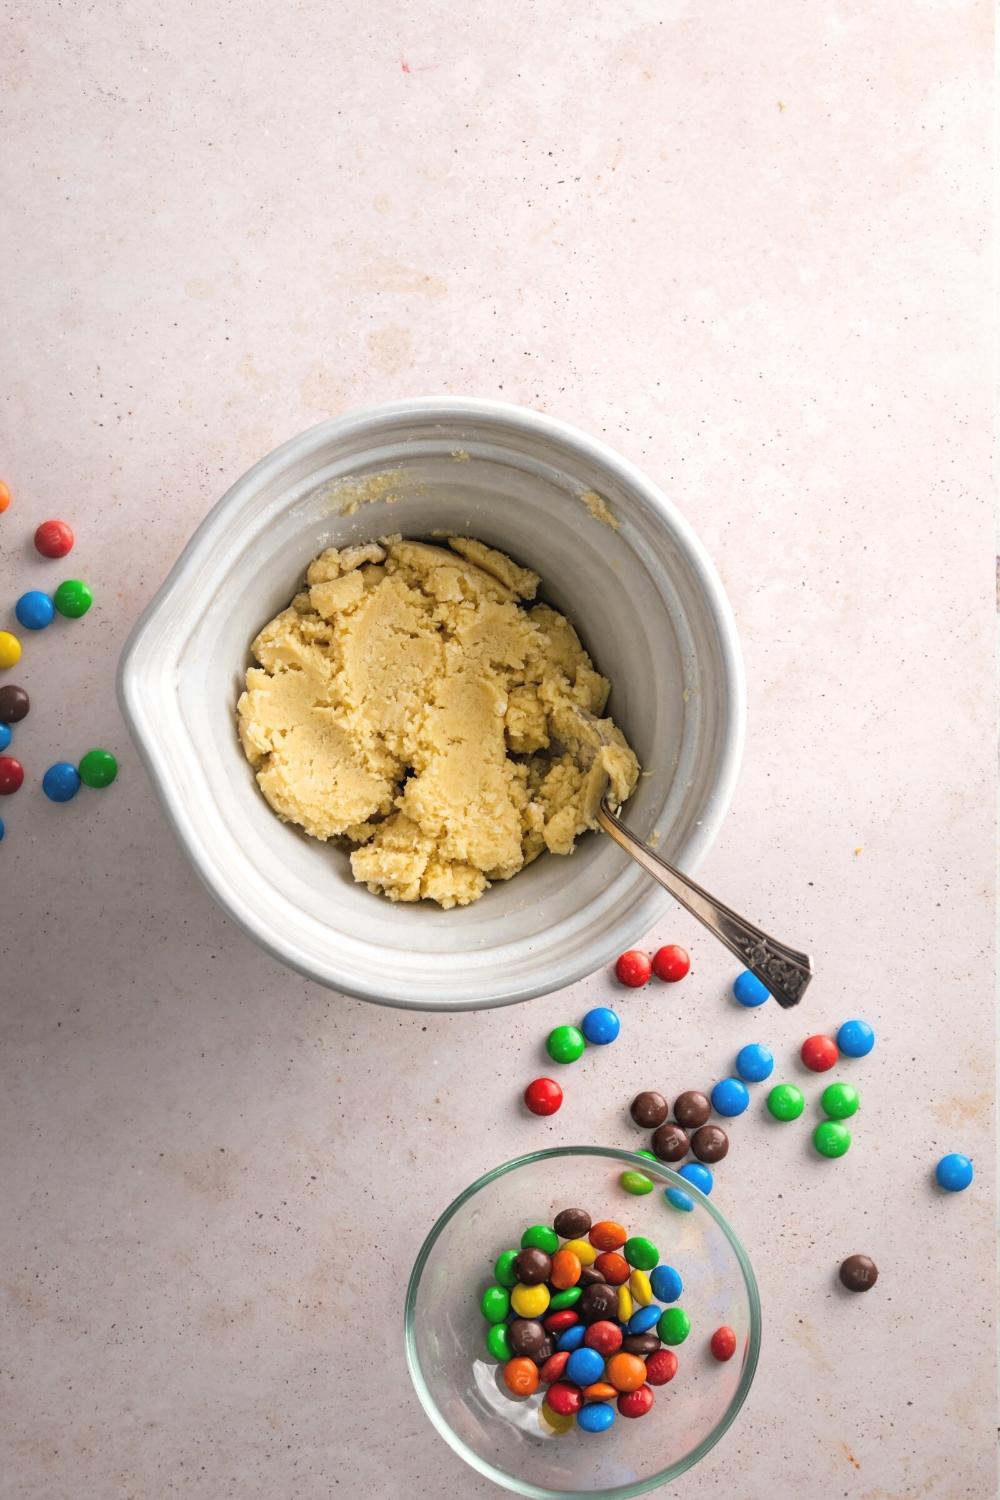 Sugar cookie dough in a white bowl with a spoon submerged in it. Behind it is a glass bowl with M&Ms and some M&Ms are on the table surround in the bowls..